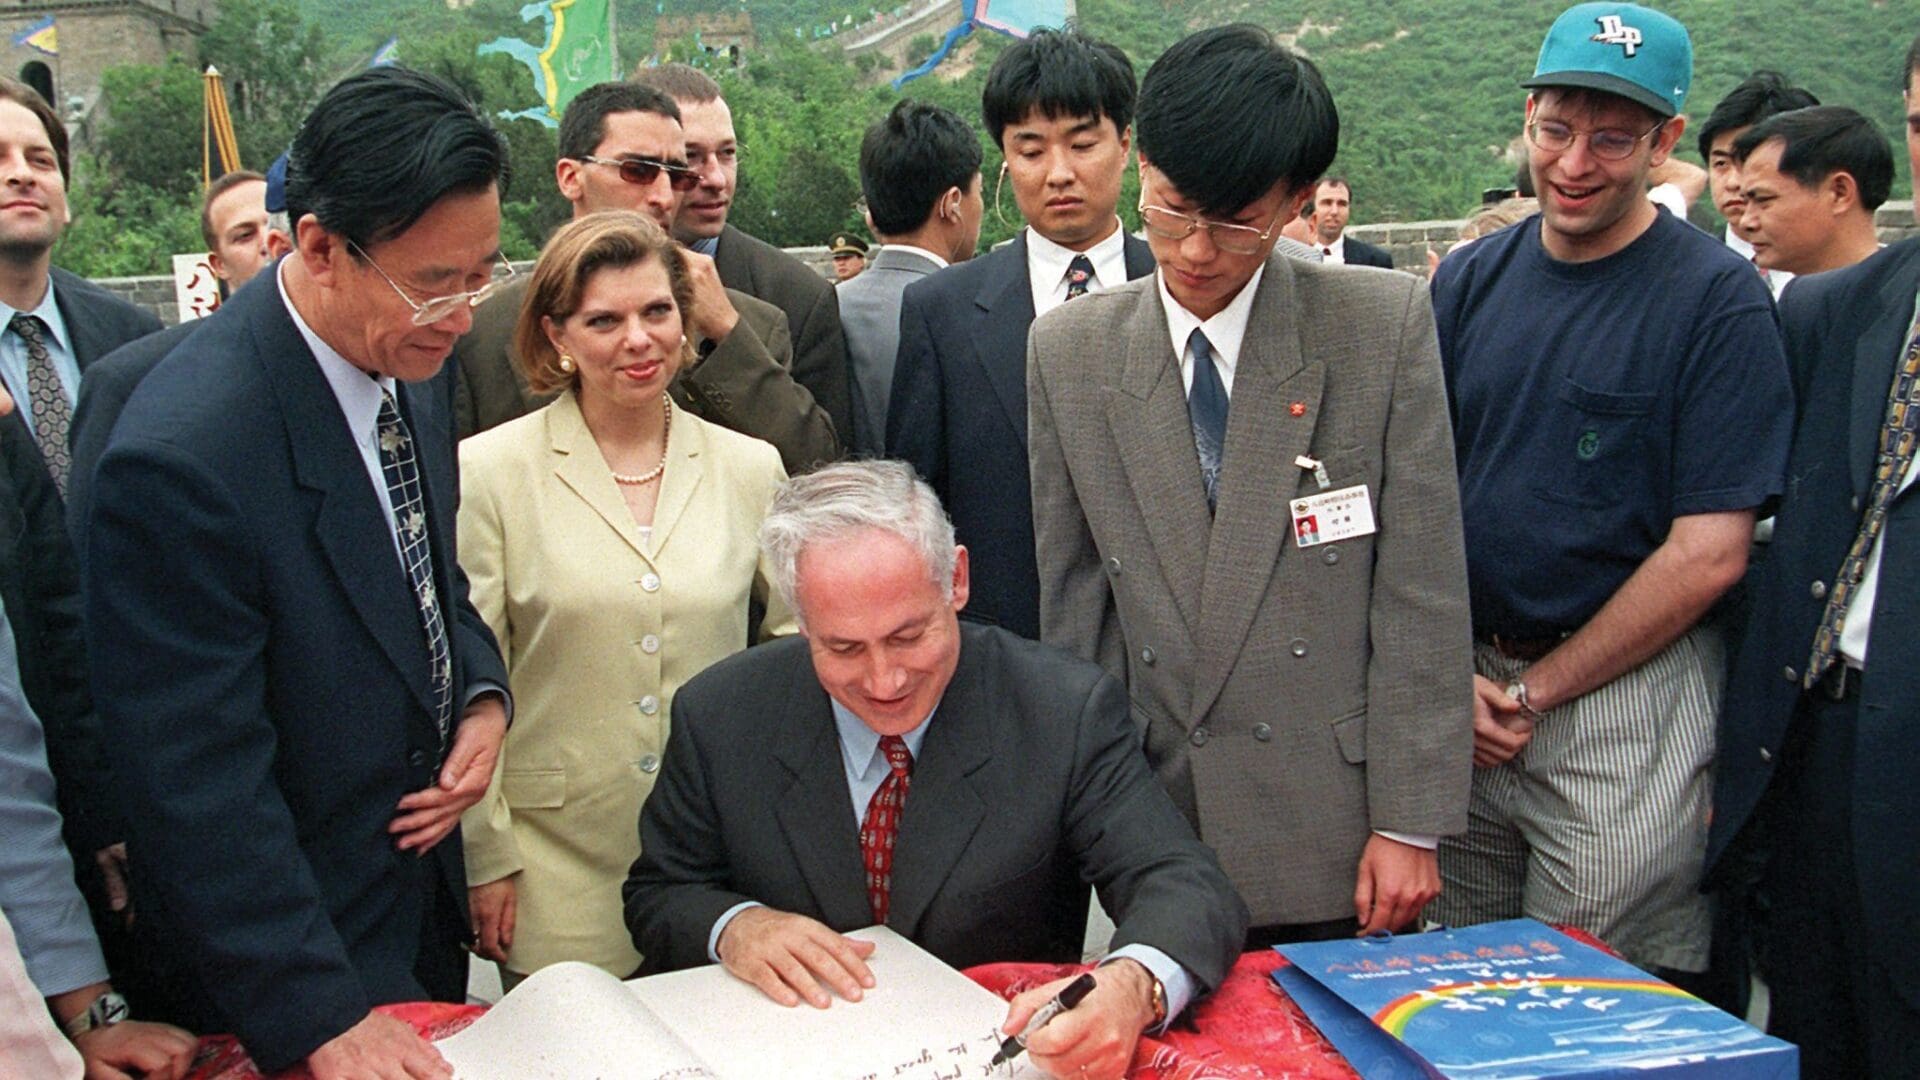 Israeli Prime Minister Benjamin Netanyahu (C) with his wife Sarah behind him, signs the visitor's book on the Great Wall of China at the Badaling Pass just north of Beijing, 27 May 1998